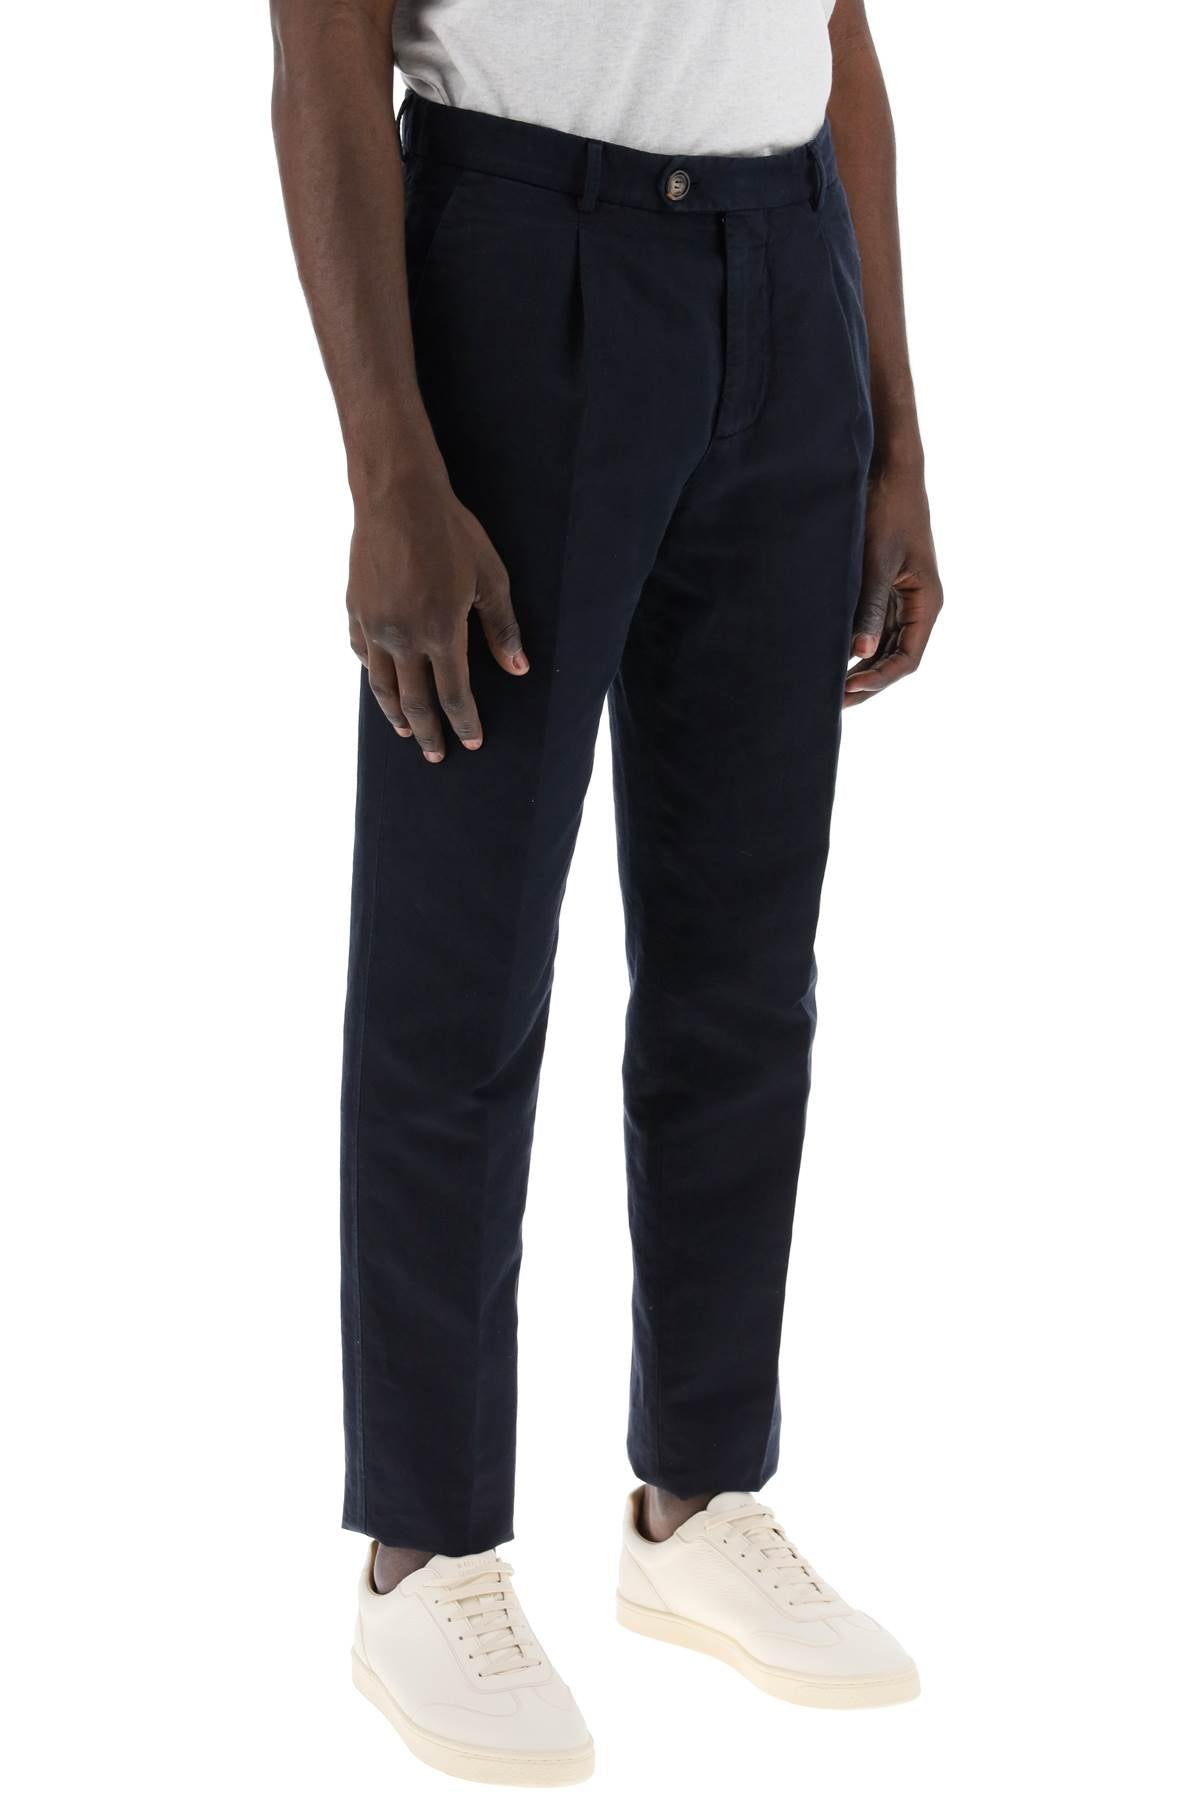 Brunello cucinelli linen and cotton blend pants for-men > clothing > trousers-Brunello Cucinelli-Urbanheer